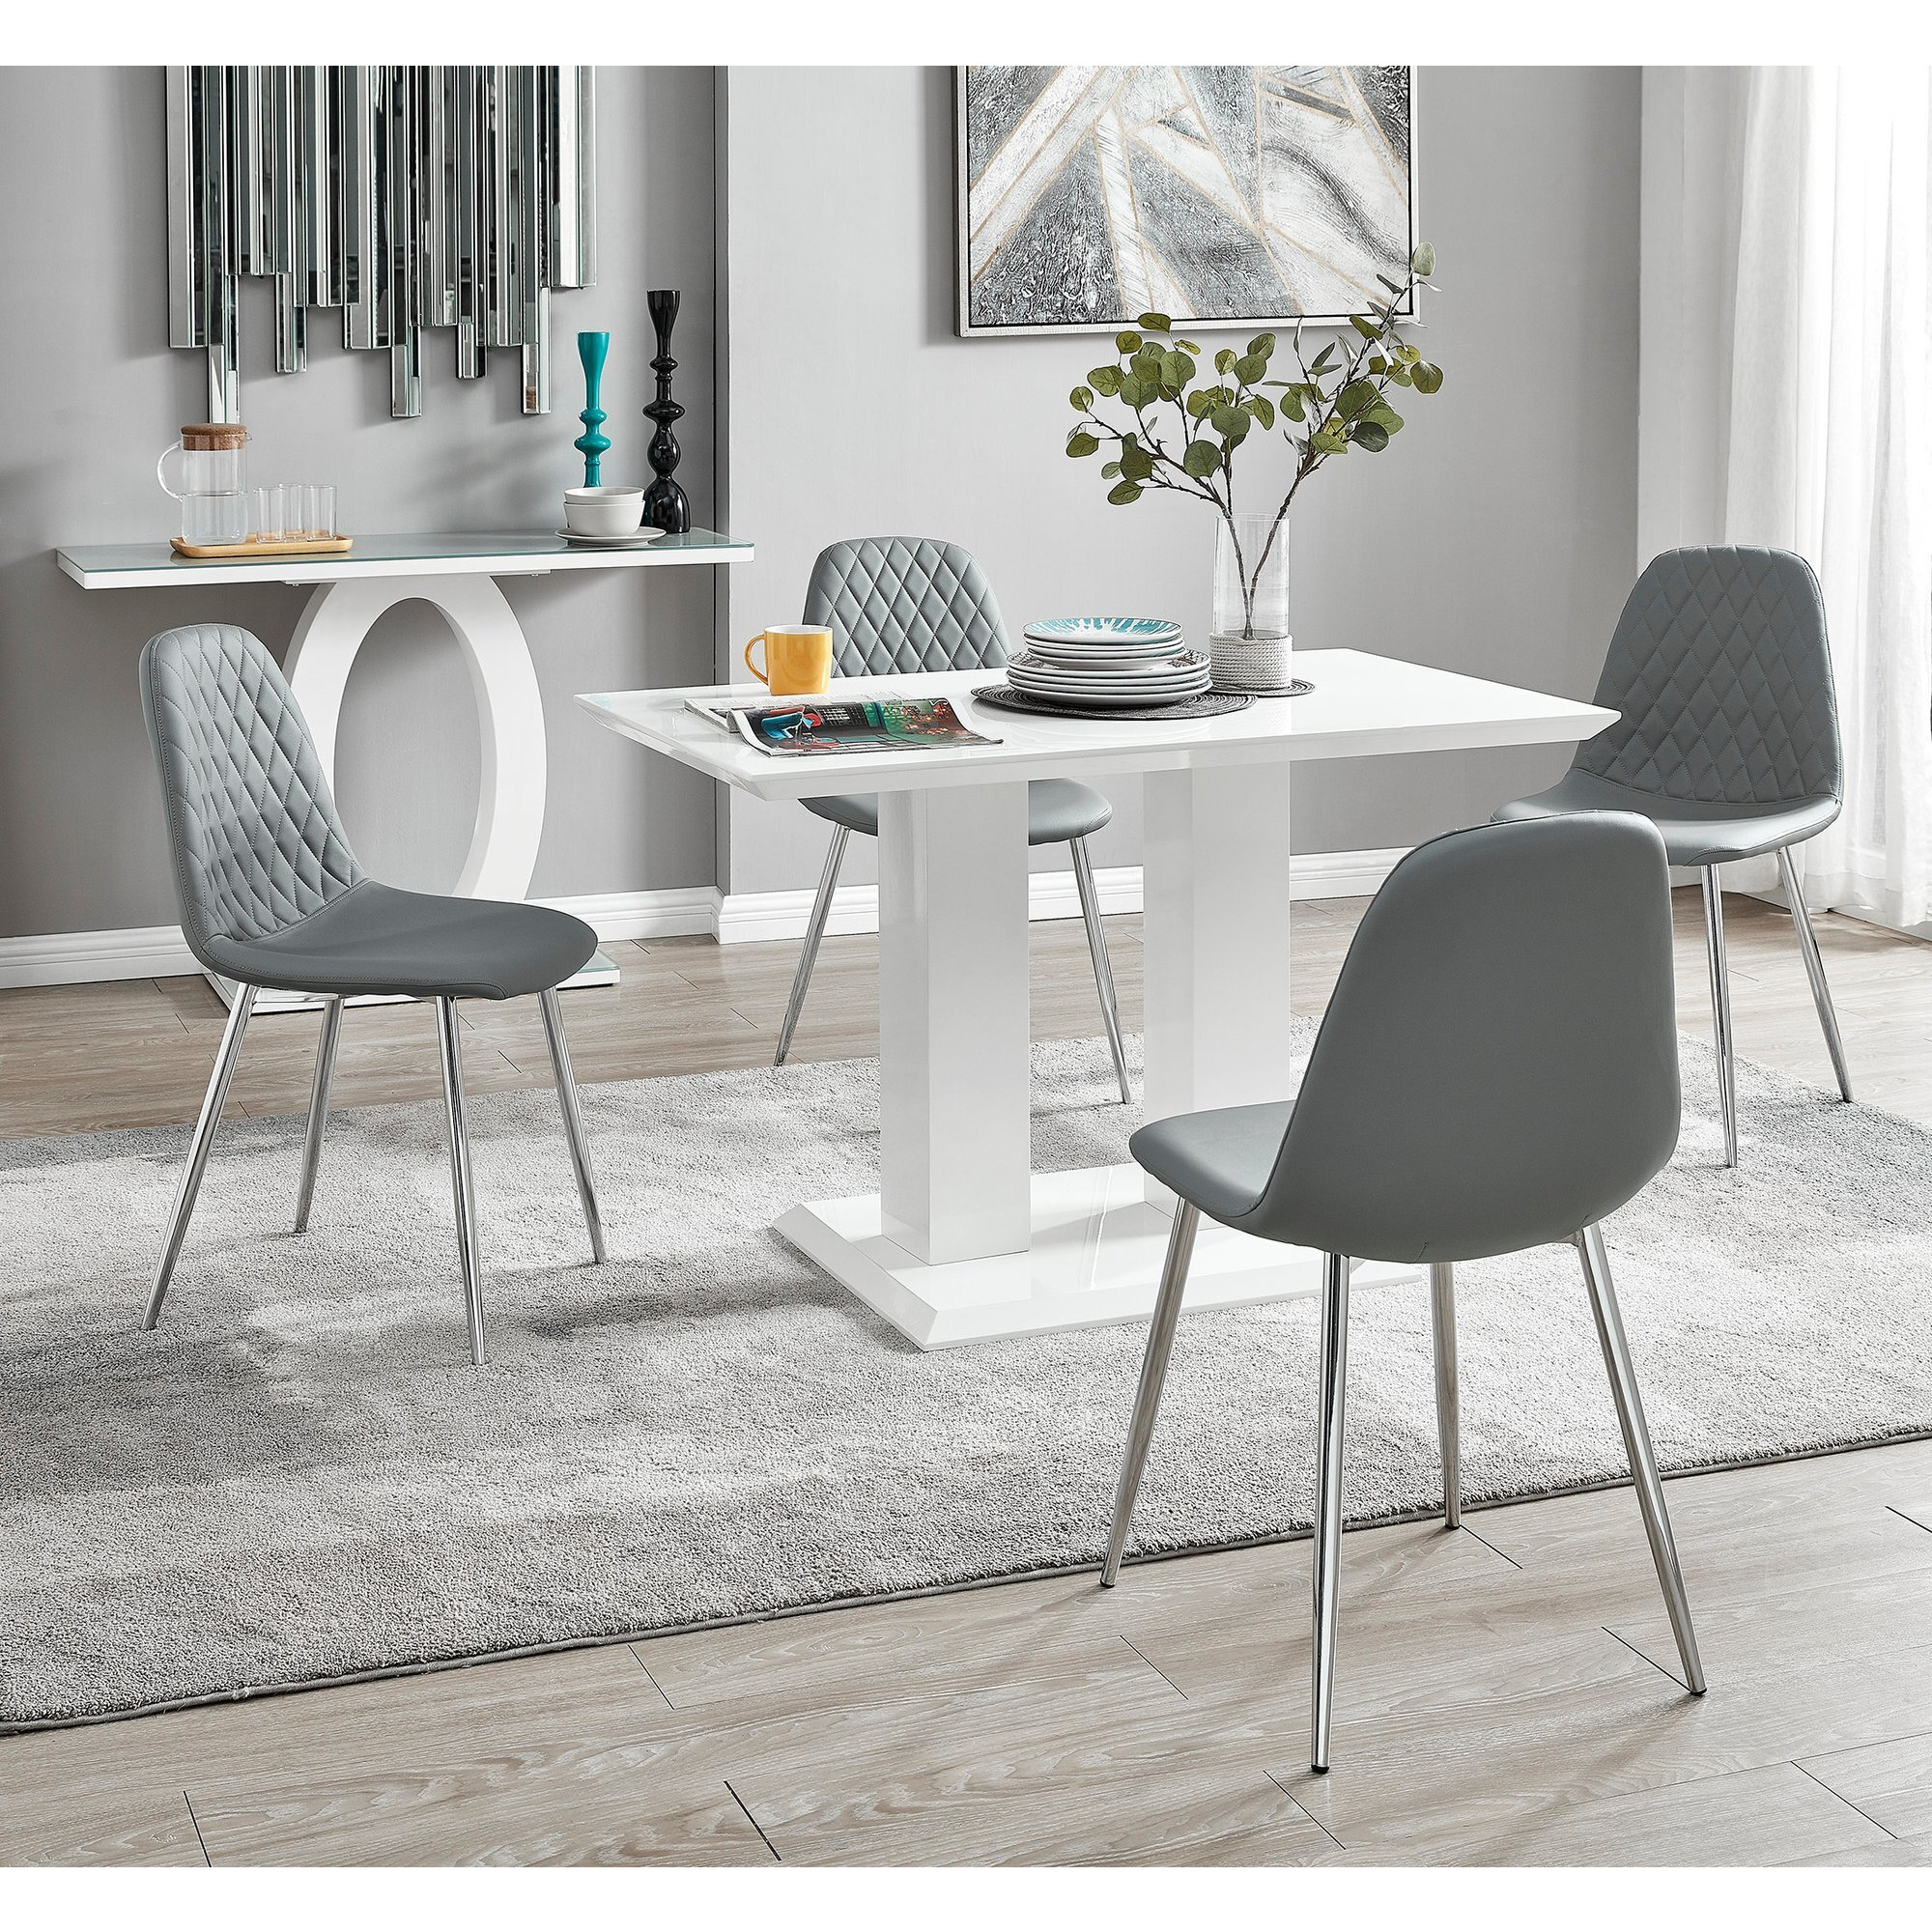 Imperia 4 Modern White High Gloss Dining Table And 4 Corona Silver Chairs Set